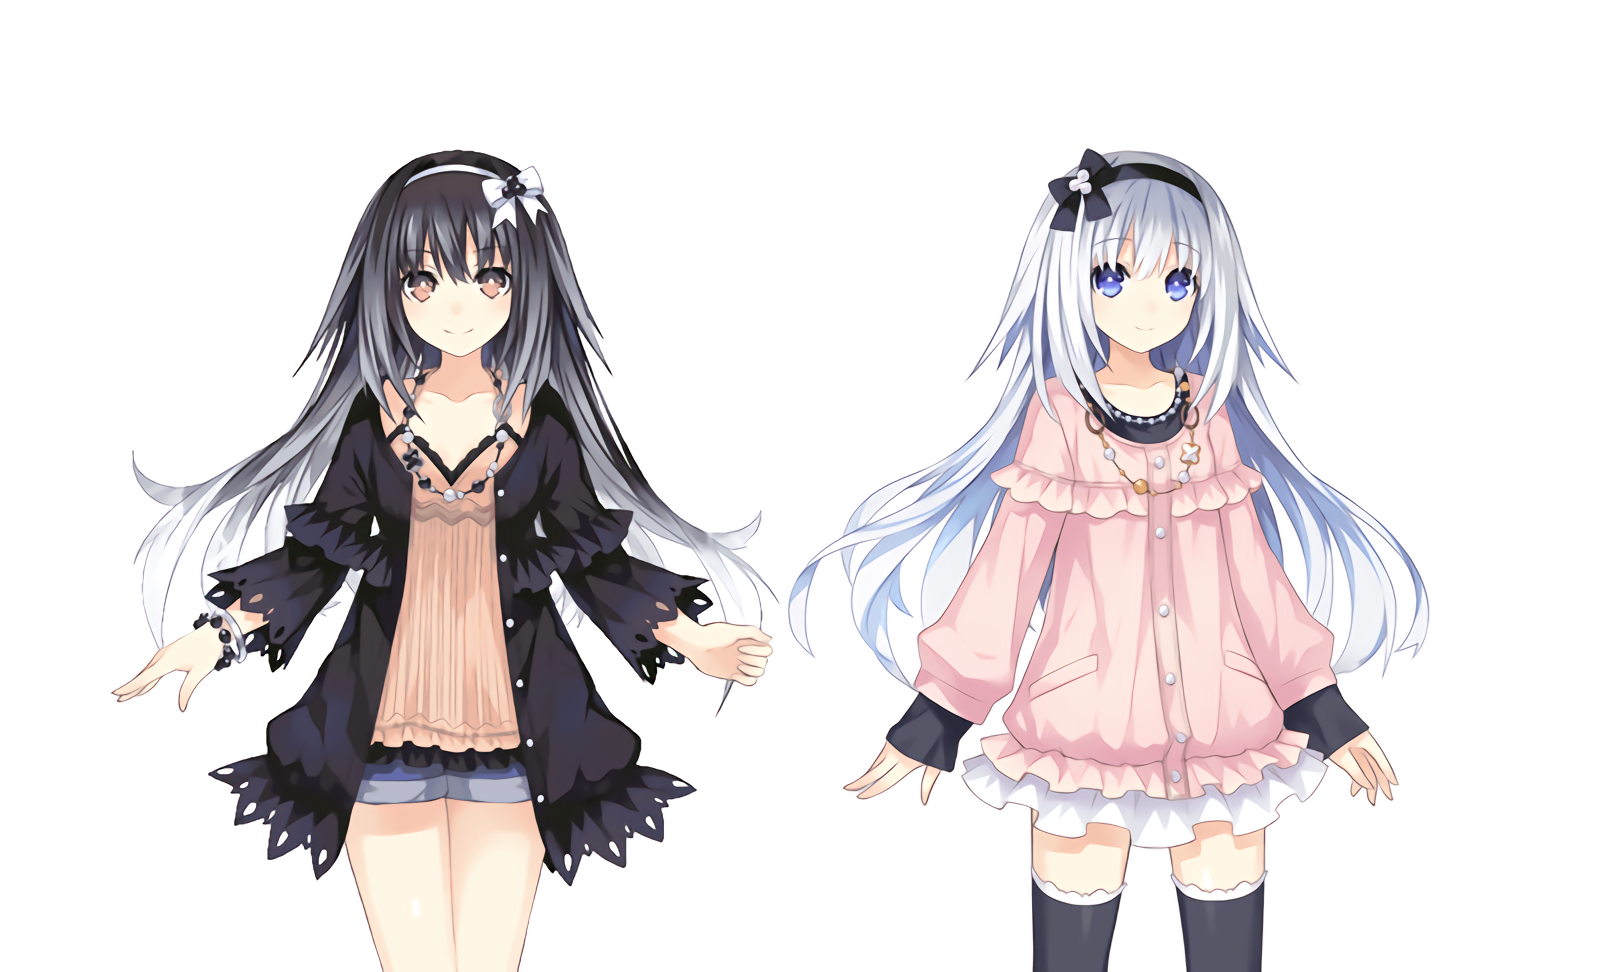 1600x972 Date A Live Wallpaper Background Image. 